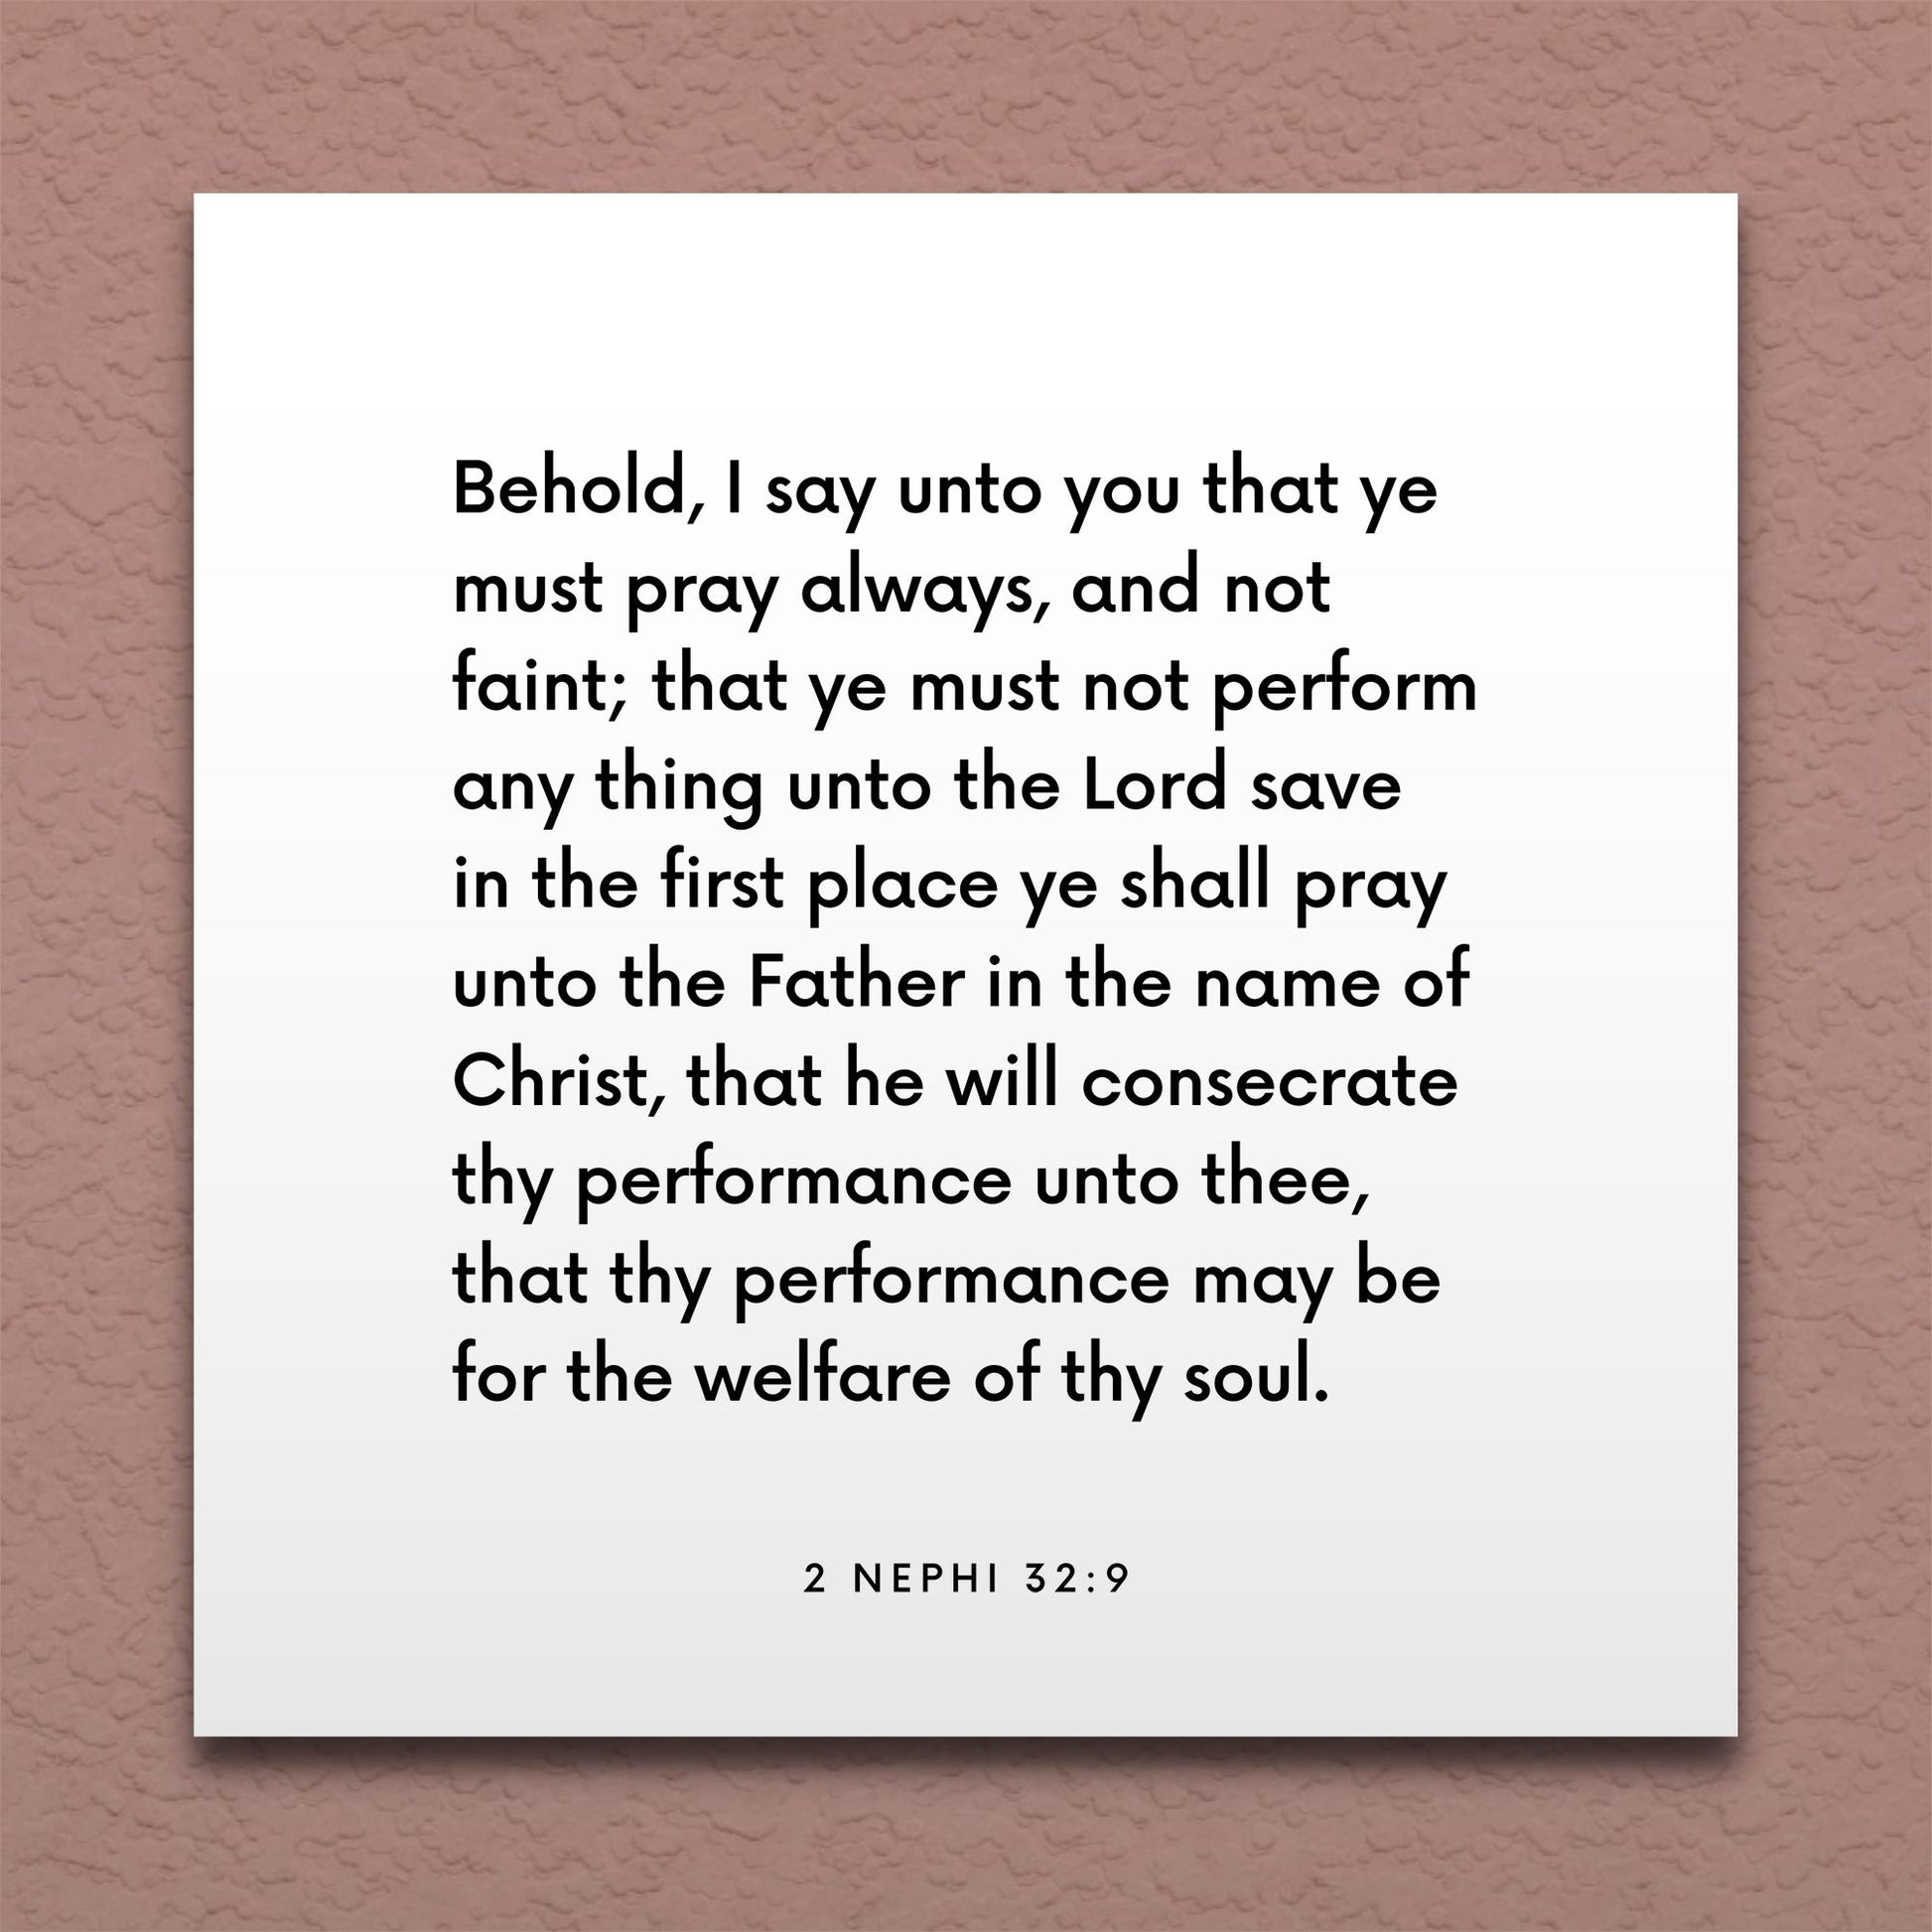 Wall-mounted scripture tile for 2 Nephi 32:9 - "Ye must pray always, and not faint"